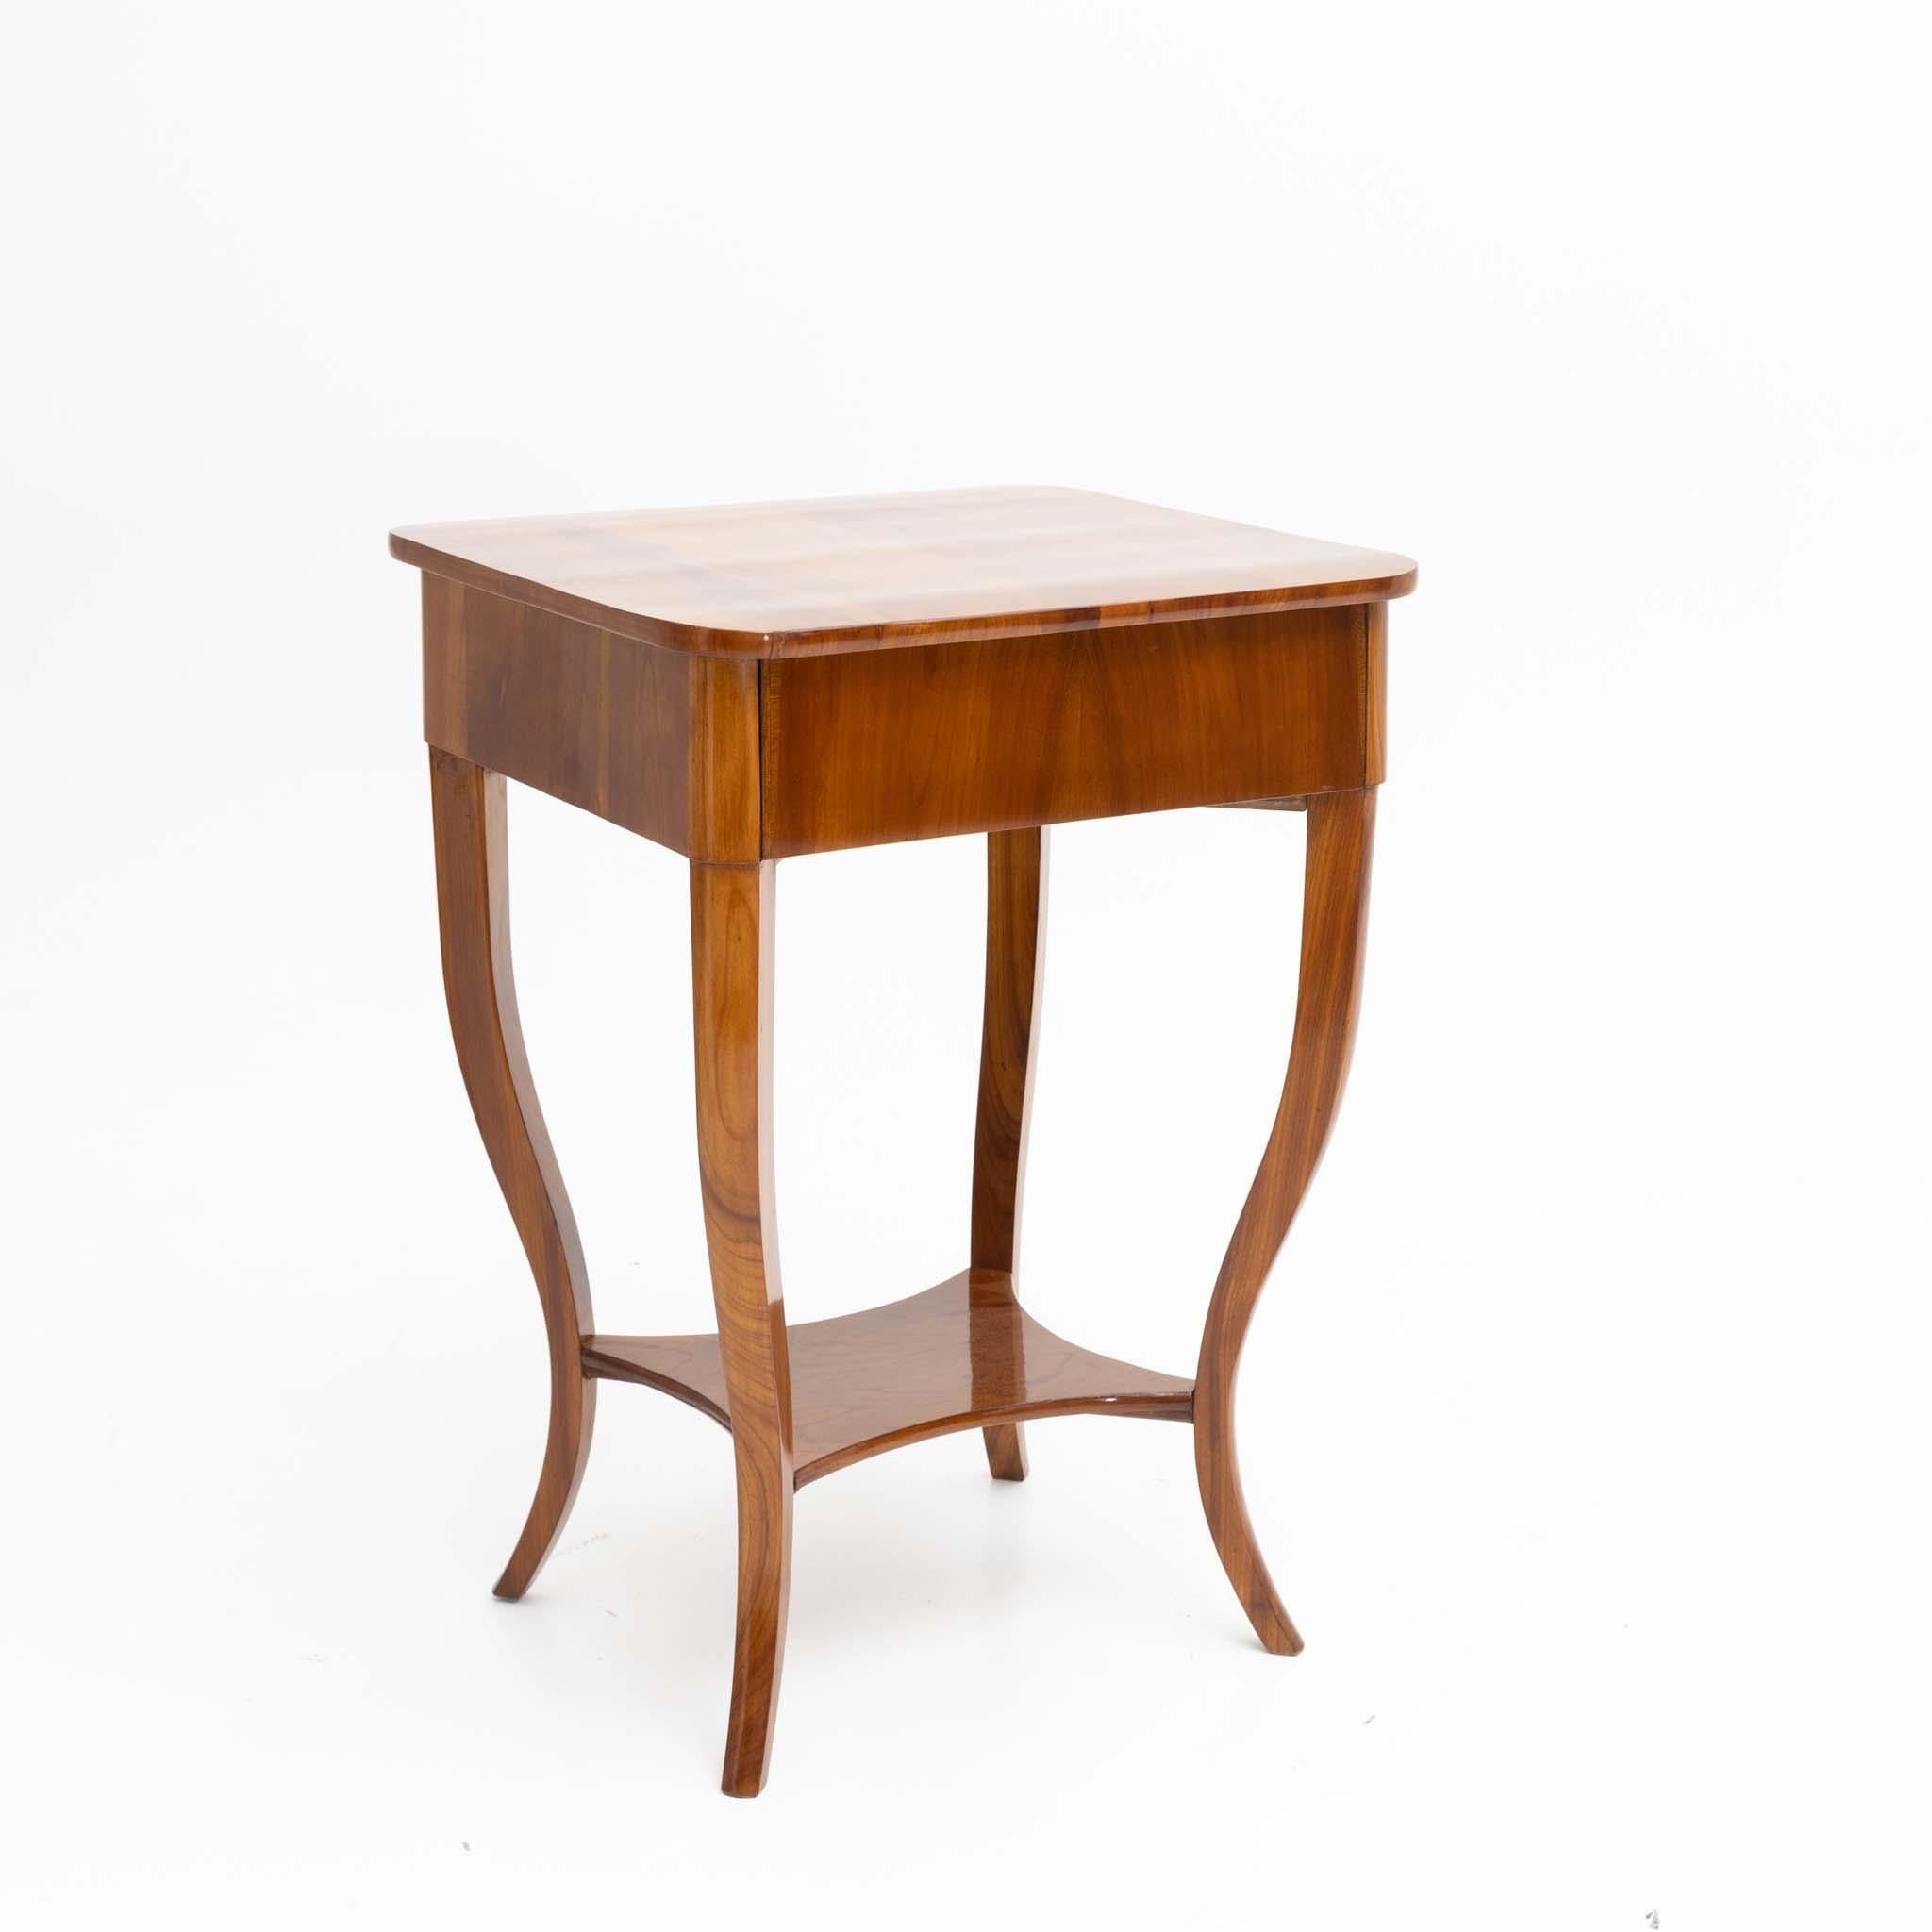 Small Biedermeier sewing table in cherry veneer with s-shaped legs, intermediate brace and rounded corners and a drawer with compartment division. Restored and hand polished condition.